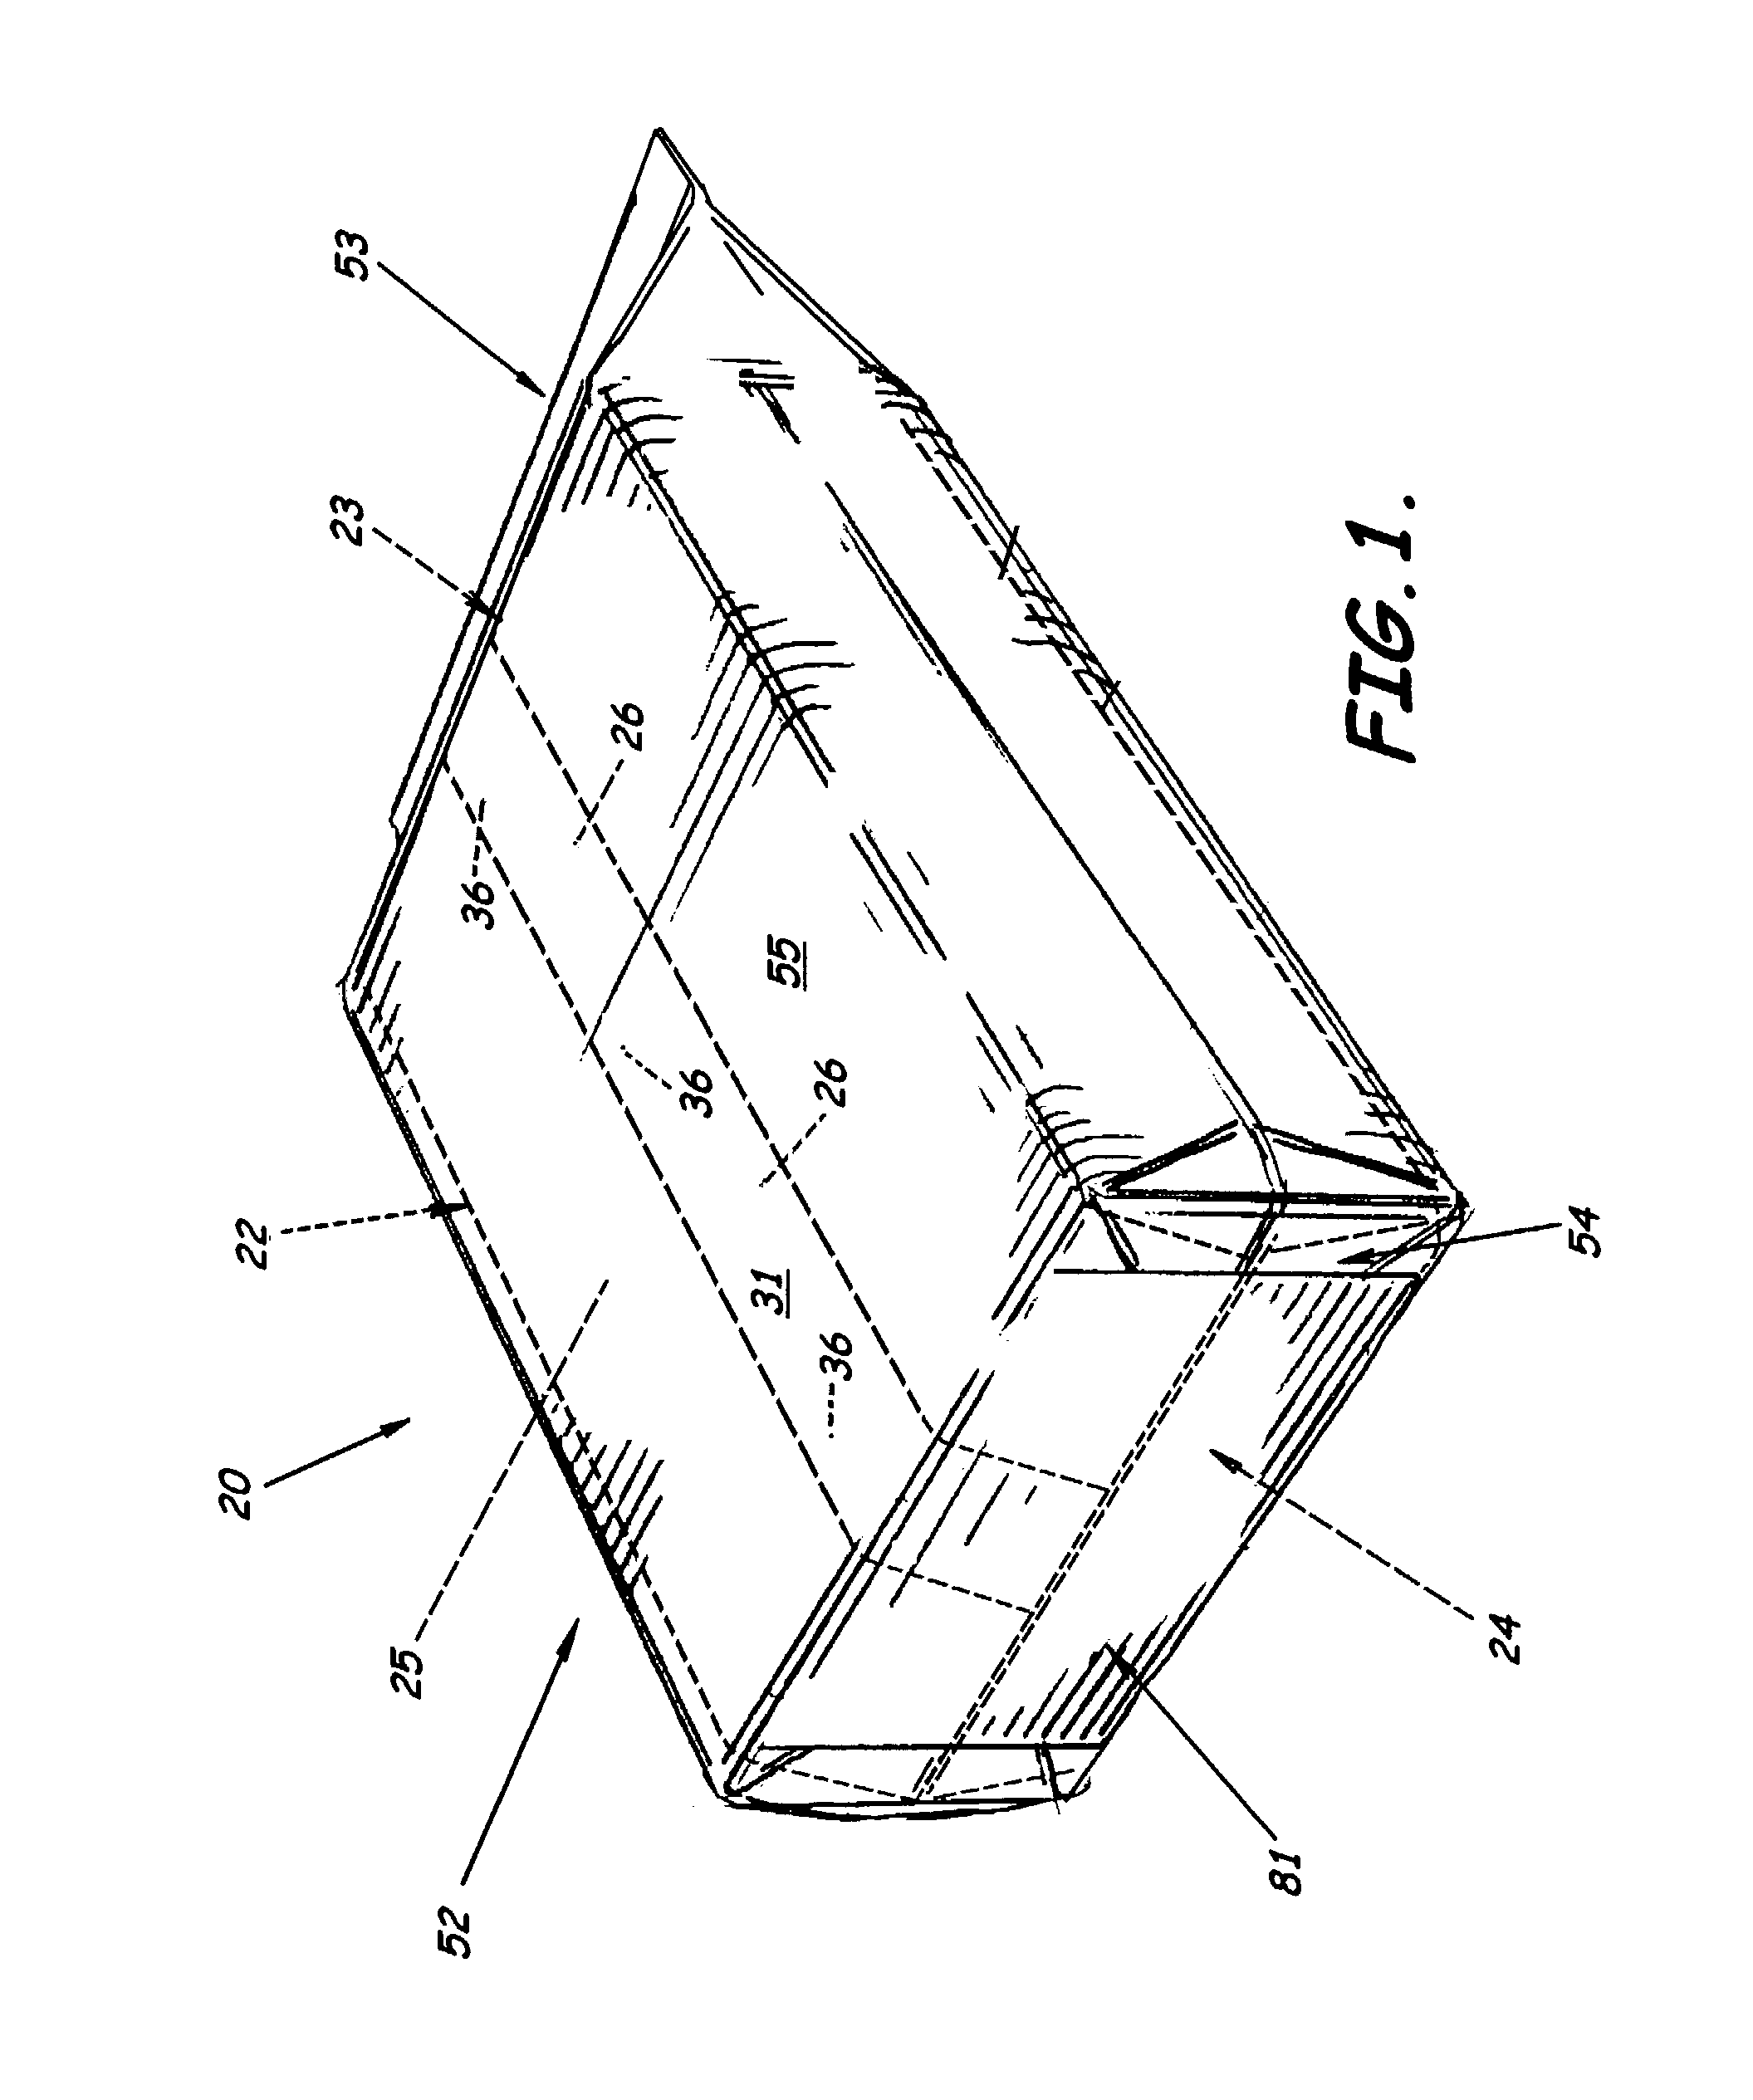 Multiwall vented bag, vented bag forming apparatus, and associated methods